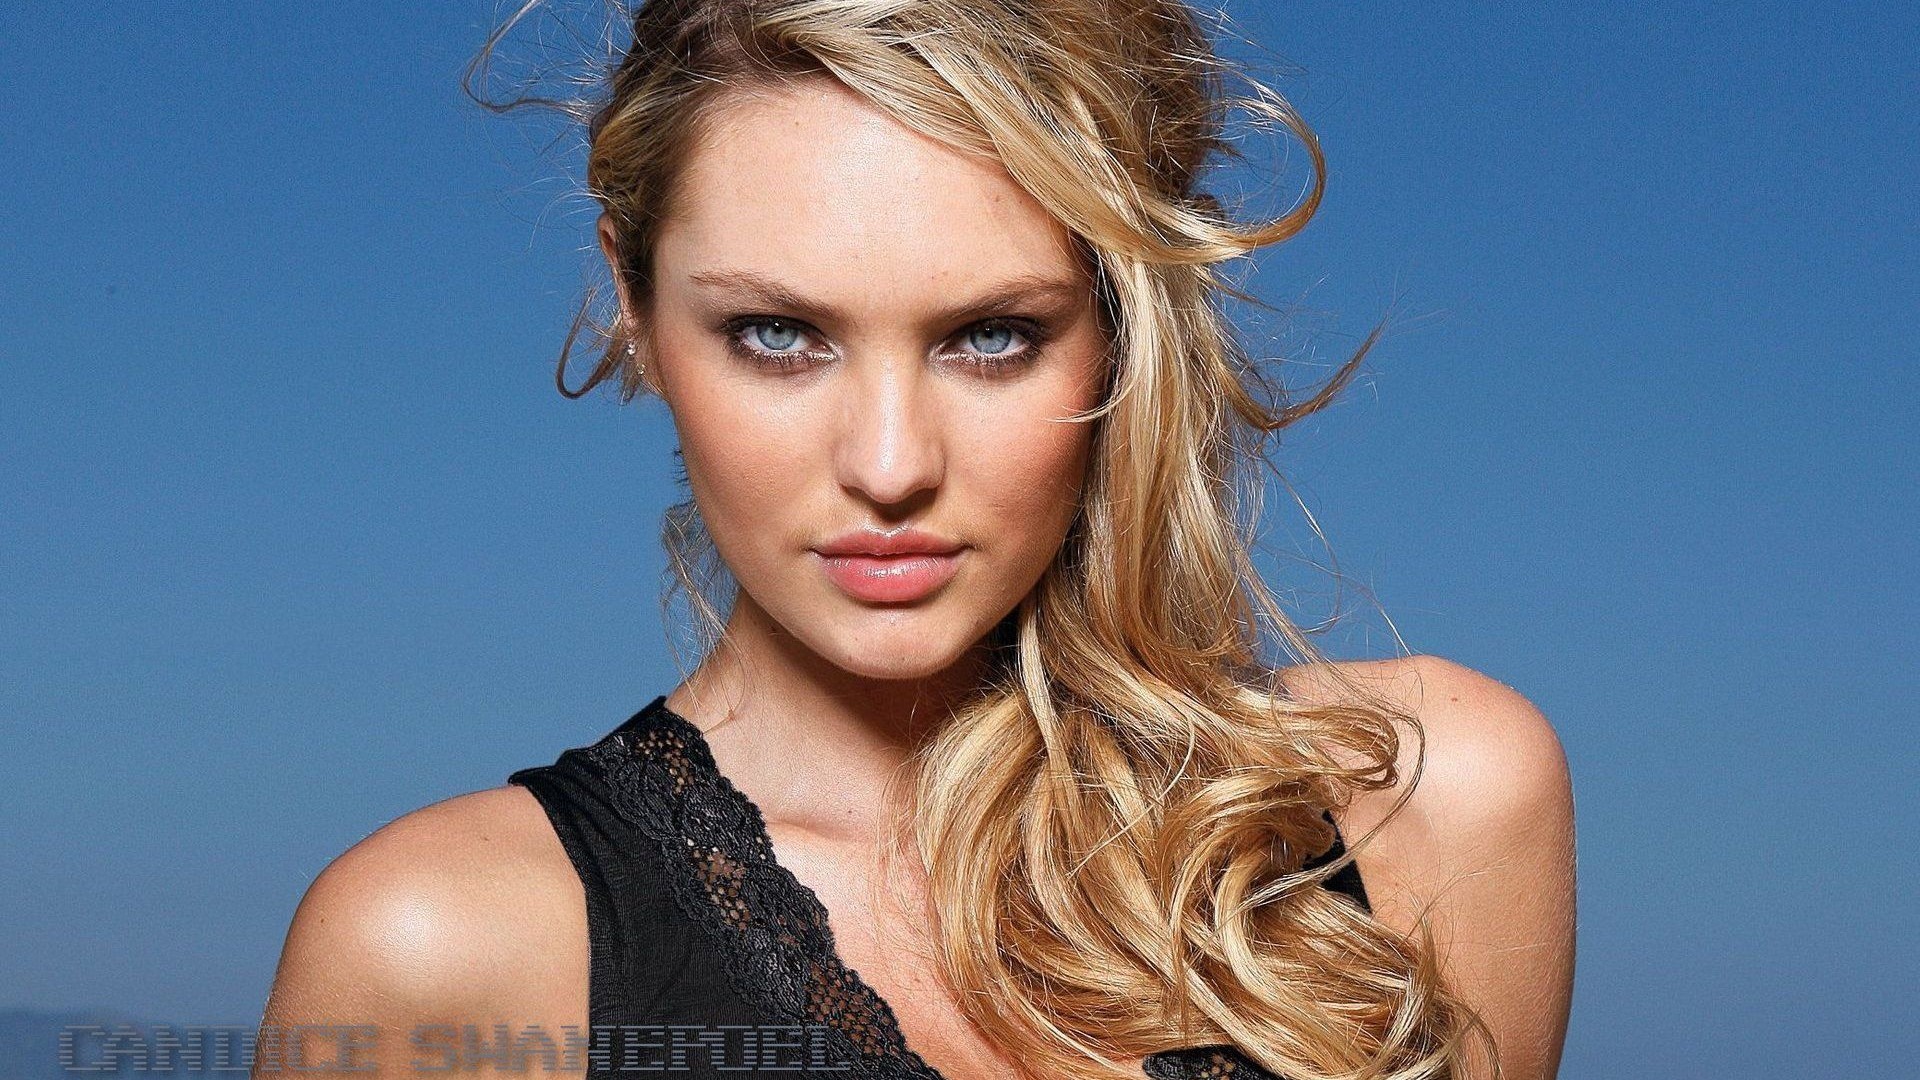 Candice Swanepoel #028 - 1920x1080 Wallpapers Pictures Photos Images